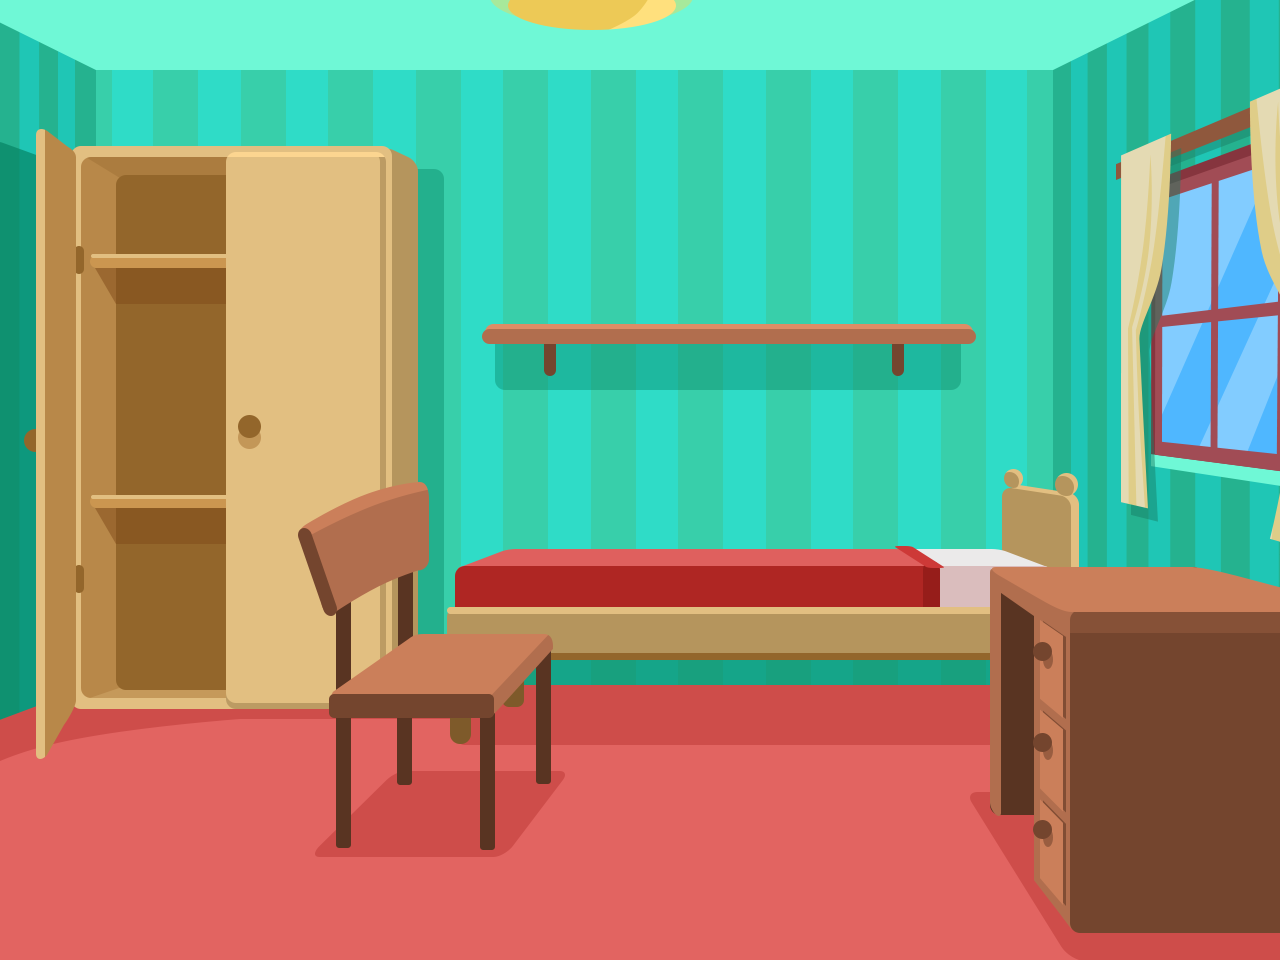 A bedroom with a closet on the left side, a desk on the right side, a bed behind the desk, a shelf above the bed in the middle of the room and a chair in front and slightly to the right of the closet.